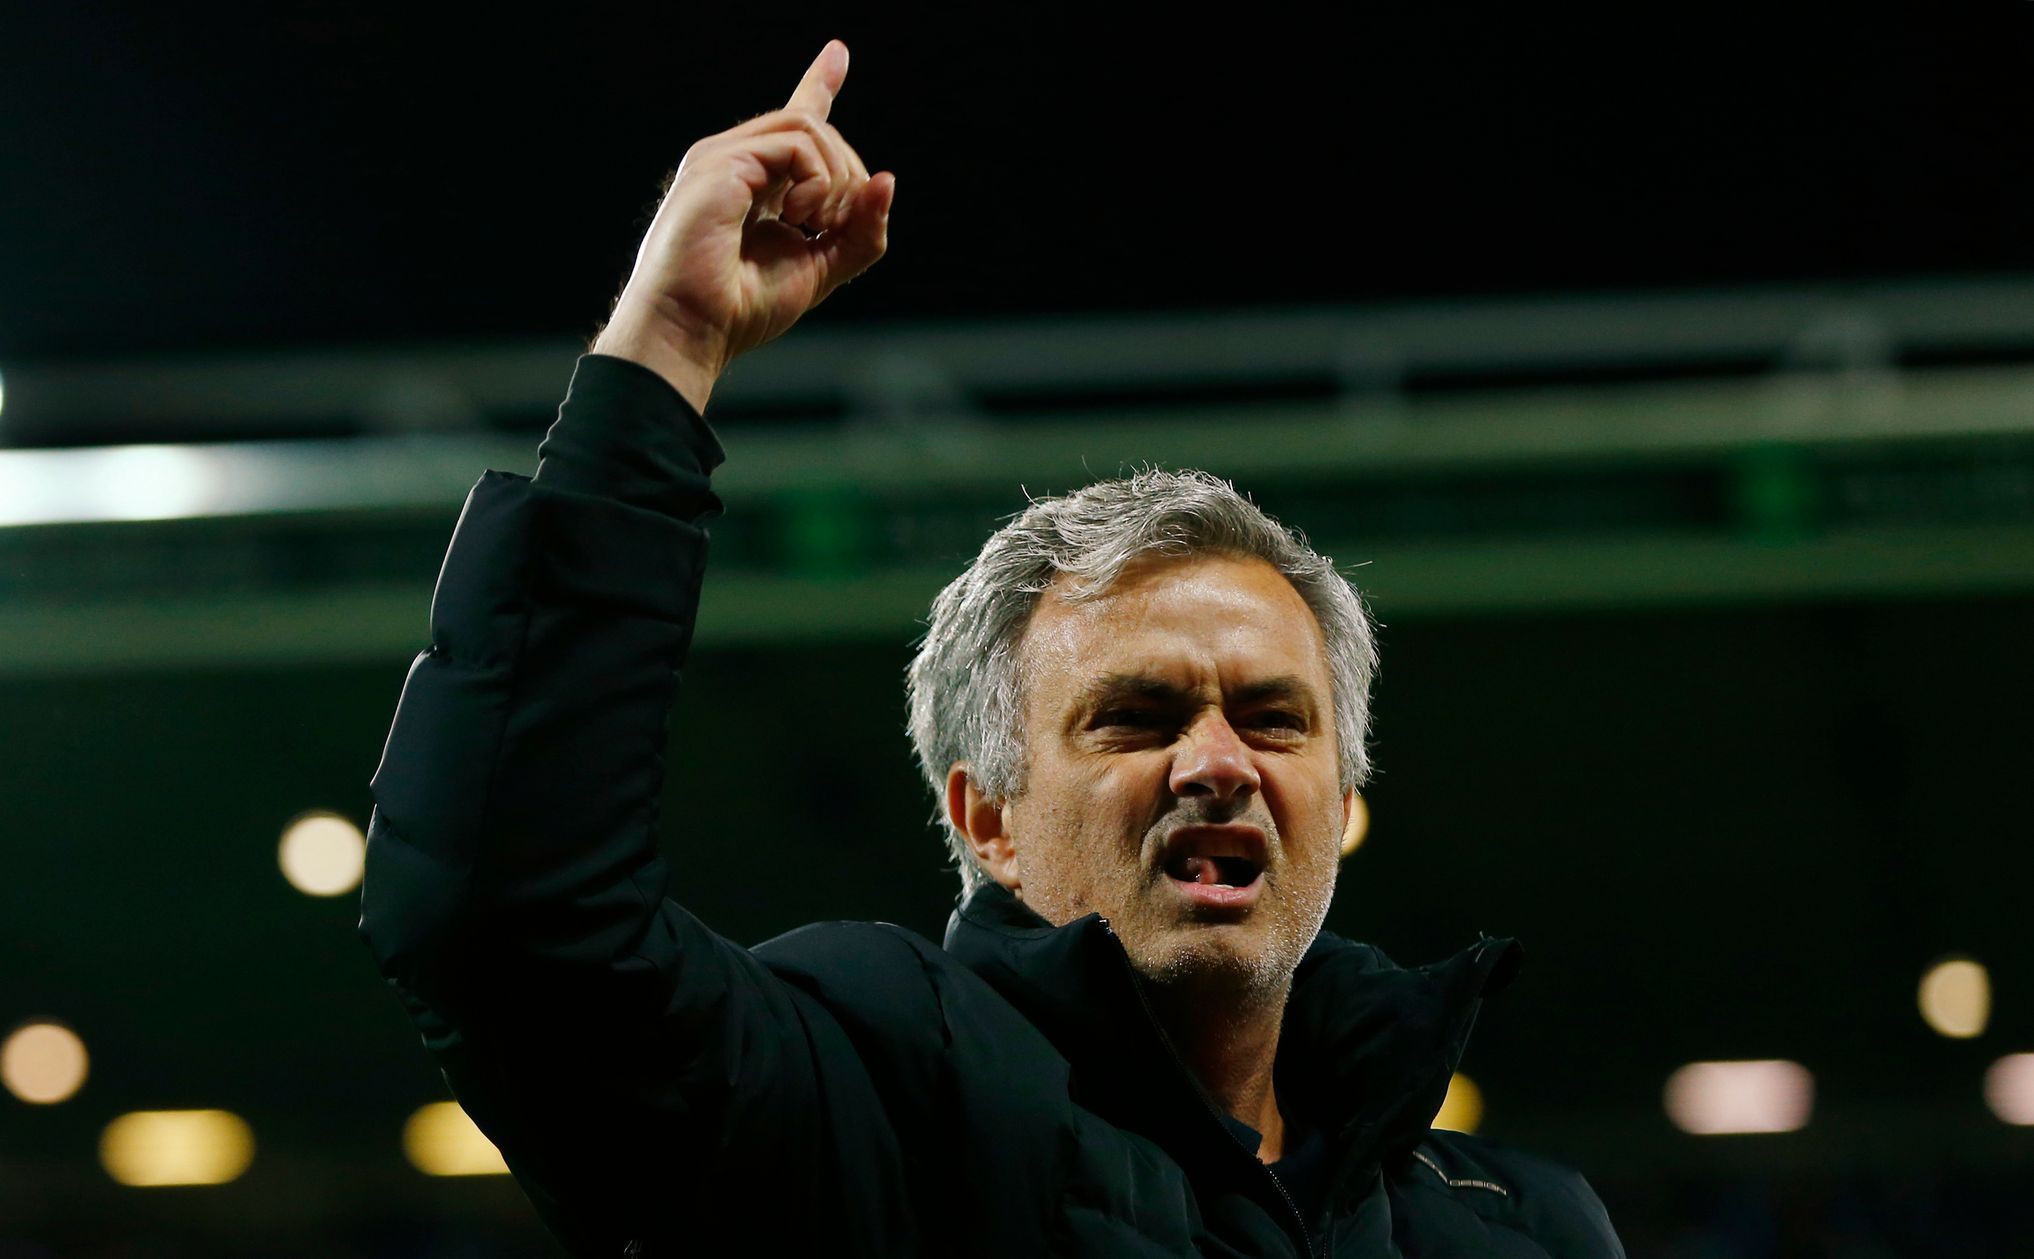 Football: Chelsea manager Jose Mourinho celebrates at the end of the match